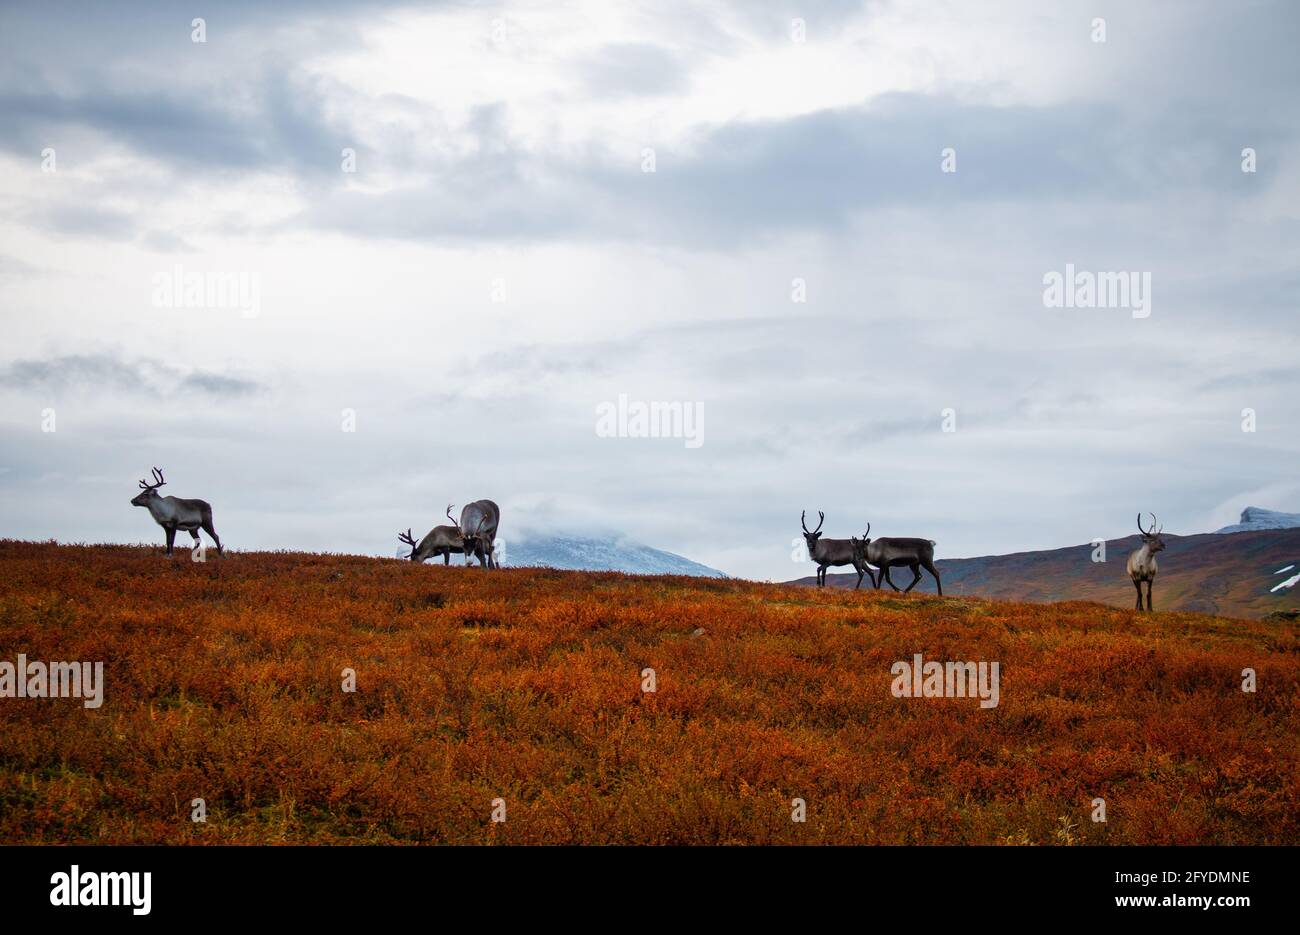 Reindeers met between Alesjaure and Tjaktja huts while hiking Kungsleden trail, early morning, September, Swedish Lapland. Stock Photo